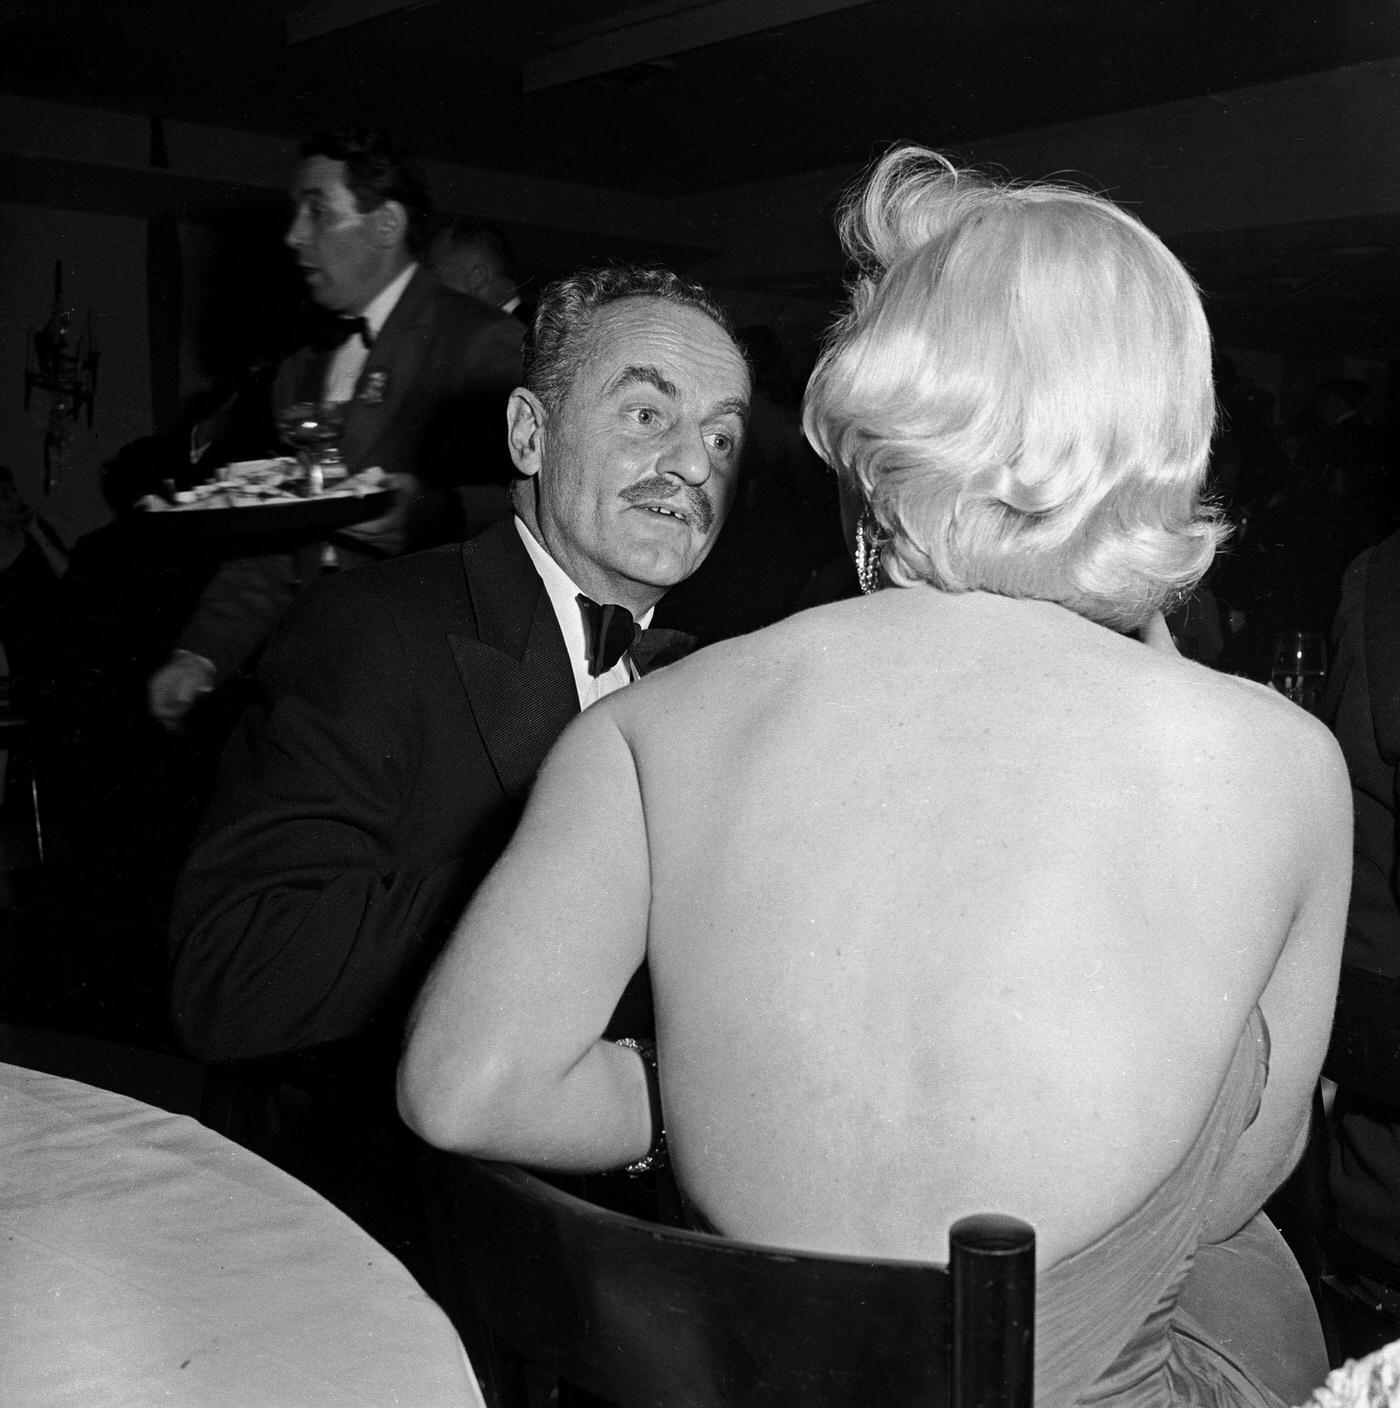 Marilyn Monroe with film producer Darryl Zanuck at the wrap party for the filming of "The Seven Year Itch" at Romanoff's Restaurant in 1954